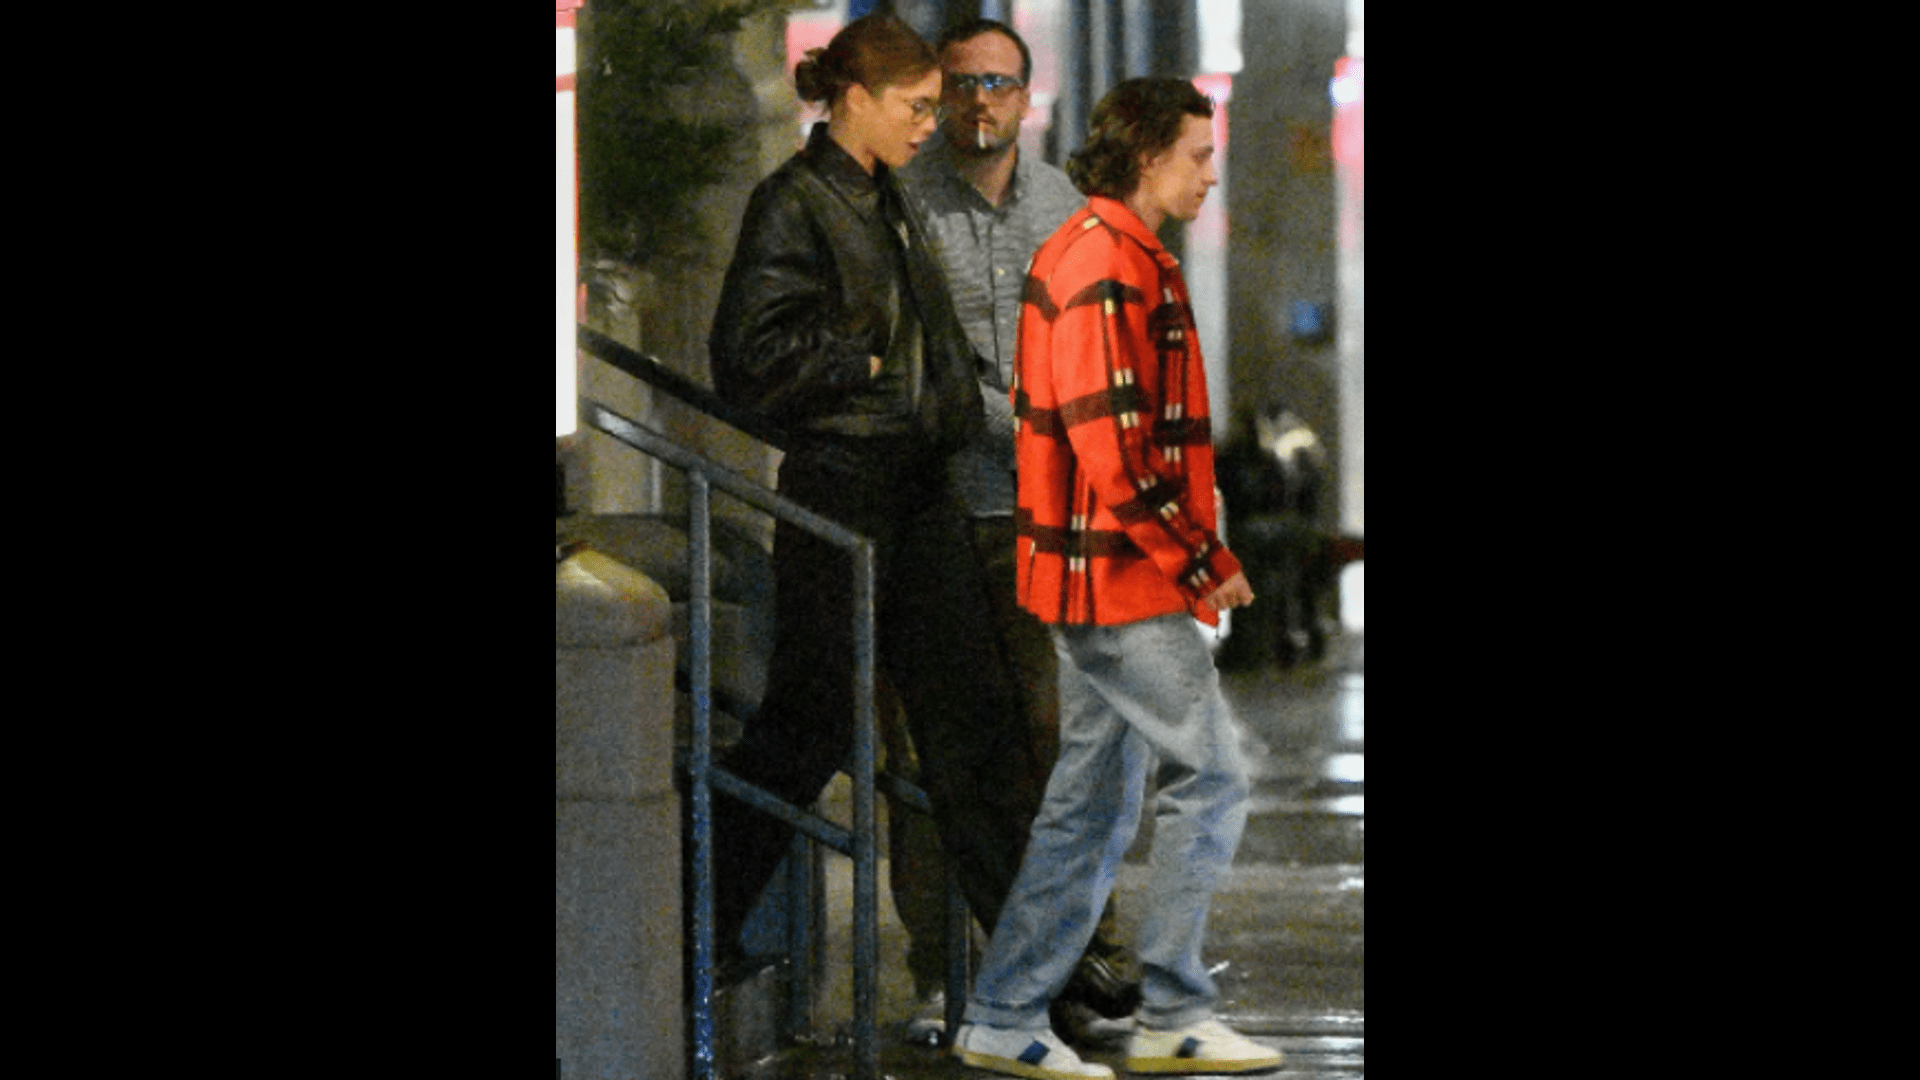 ”rainy-night-in-new-york-zendaya-and-tom-holland-have-a-romantic-date”